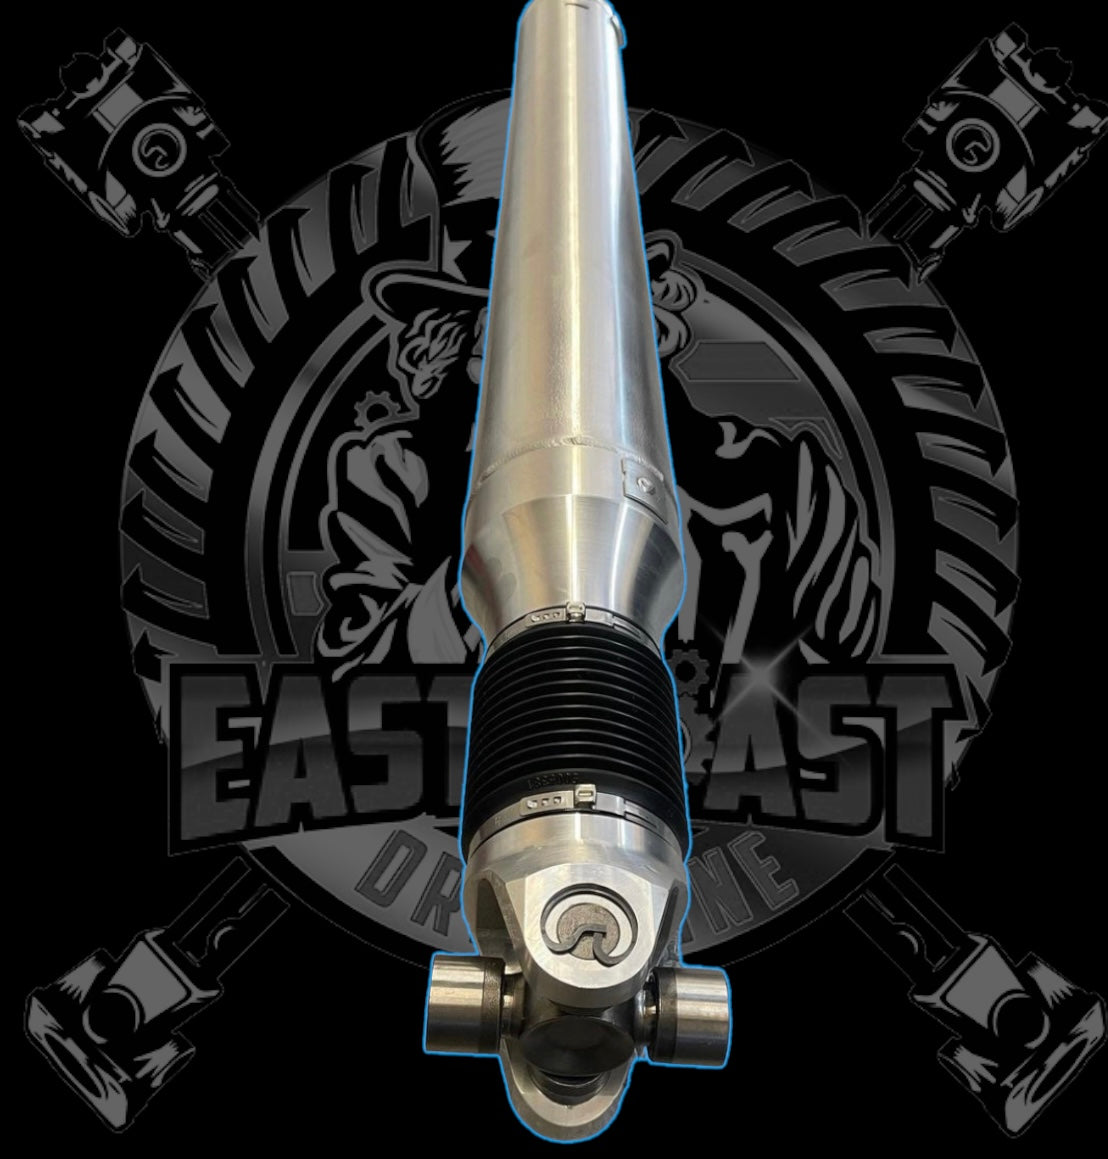 2003-2007 Ford F350 SUPER DUTY 7.3L, 6.8L, 6.0L and 5.4L AWD/4WD Automatic/Manual Custom 1 Piece Aluminum Driveshaft Replaces 2 Piece Driveshaft with Hanger Bearing